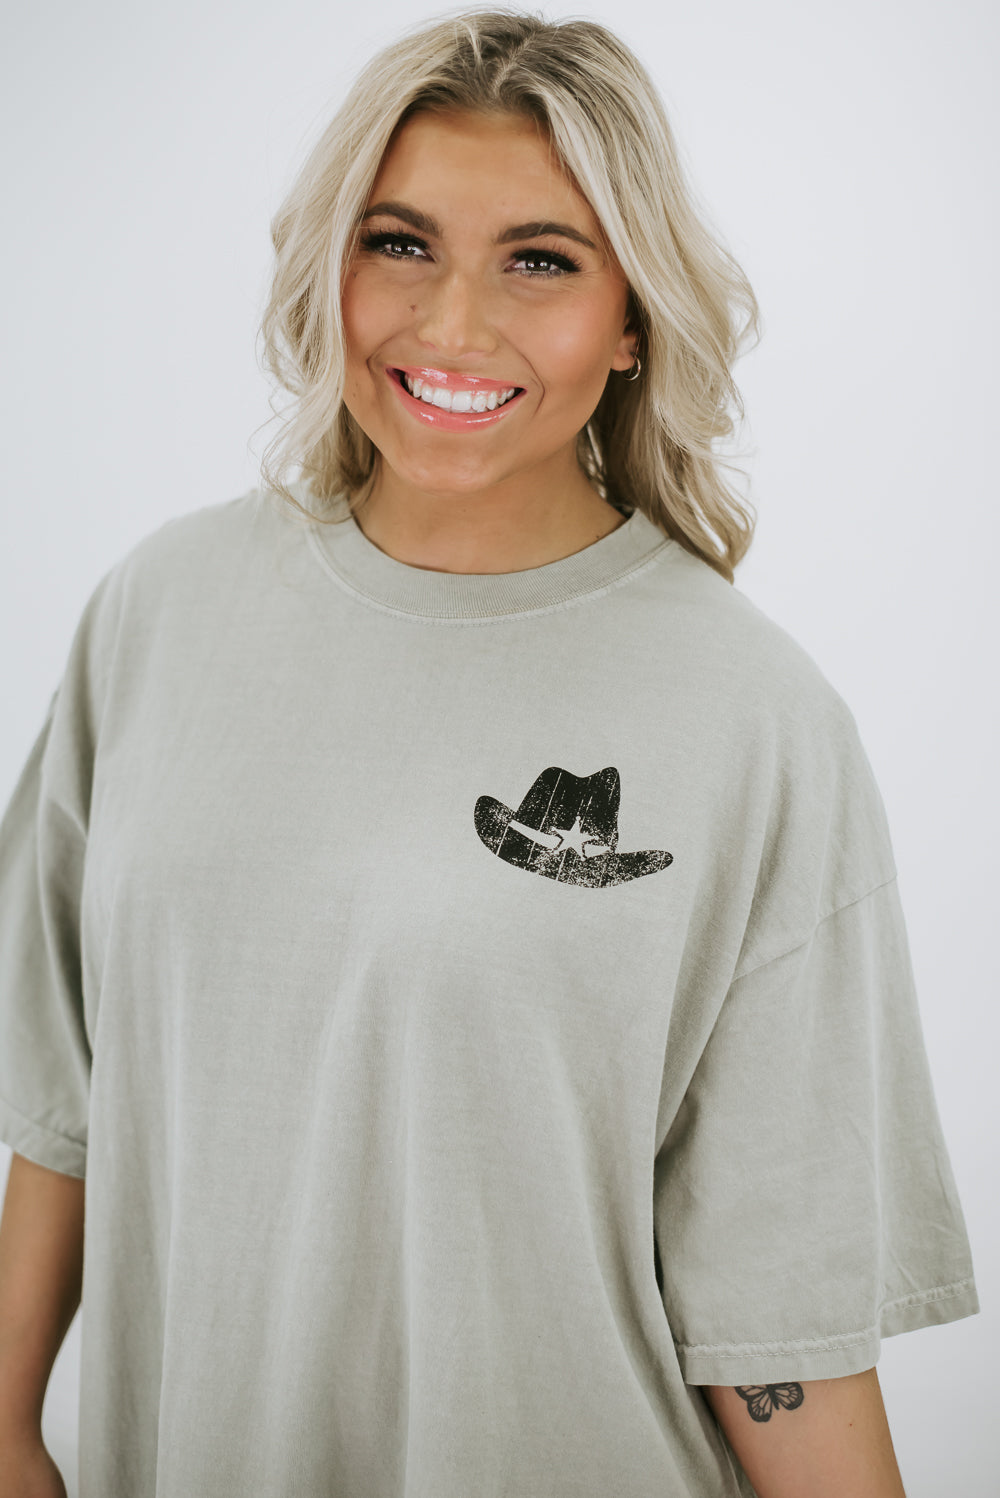 Cowboy Baby Graphic Tee, Olive